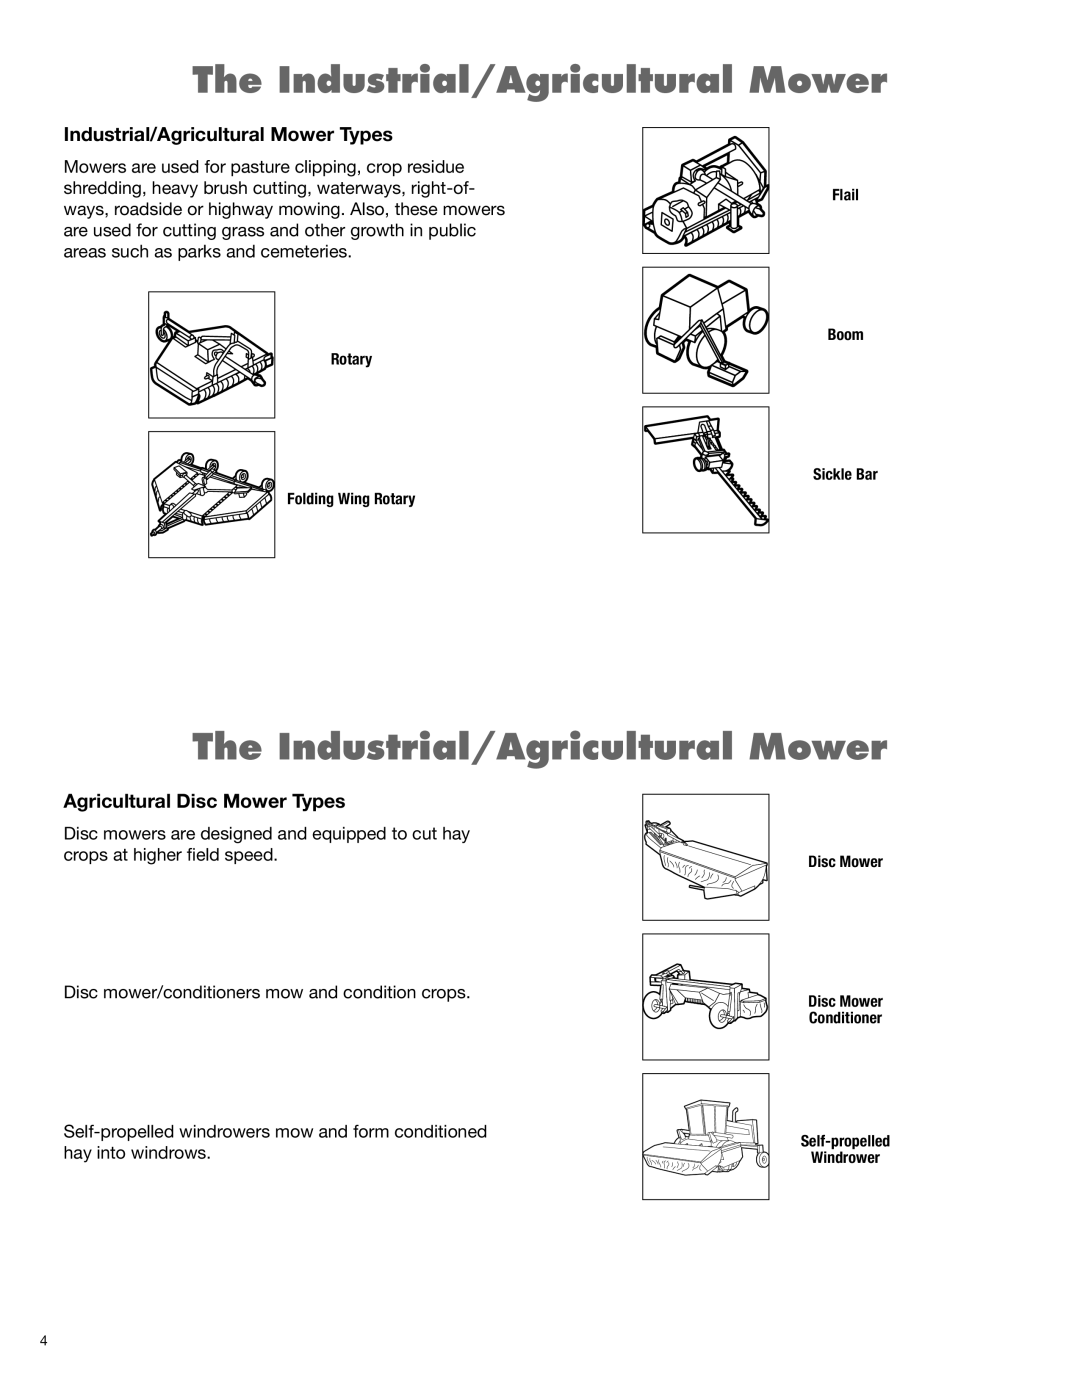 Blue Rhino RB60/72 The Industrial/Agricultural Mower, Industrial/Agricultural Mower Types, Agricultural Disc Mower Types 